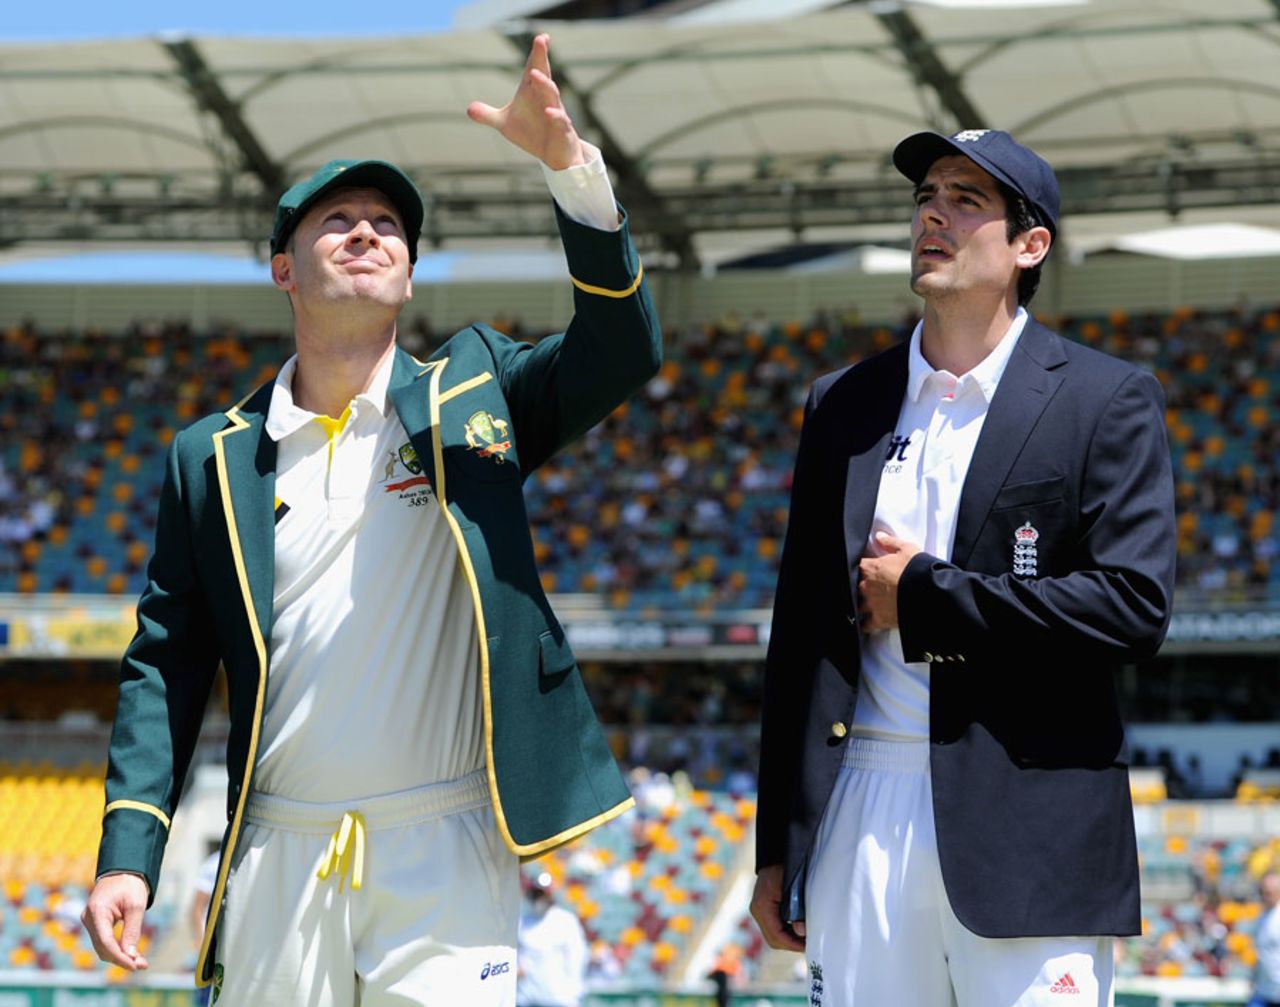 Michael Clarke tosses the coin as Alastair Cook calls ... wrongly, Australia v England, 1st Test, Brisbane, 1st day, November 21, 2013